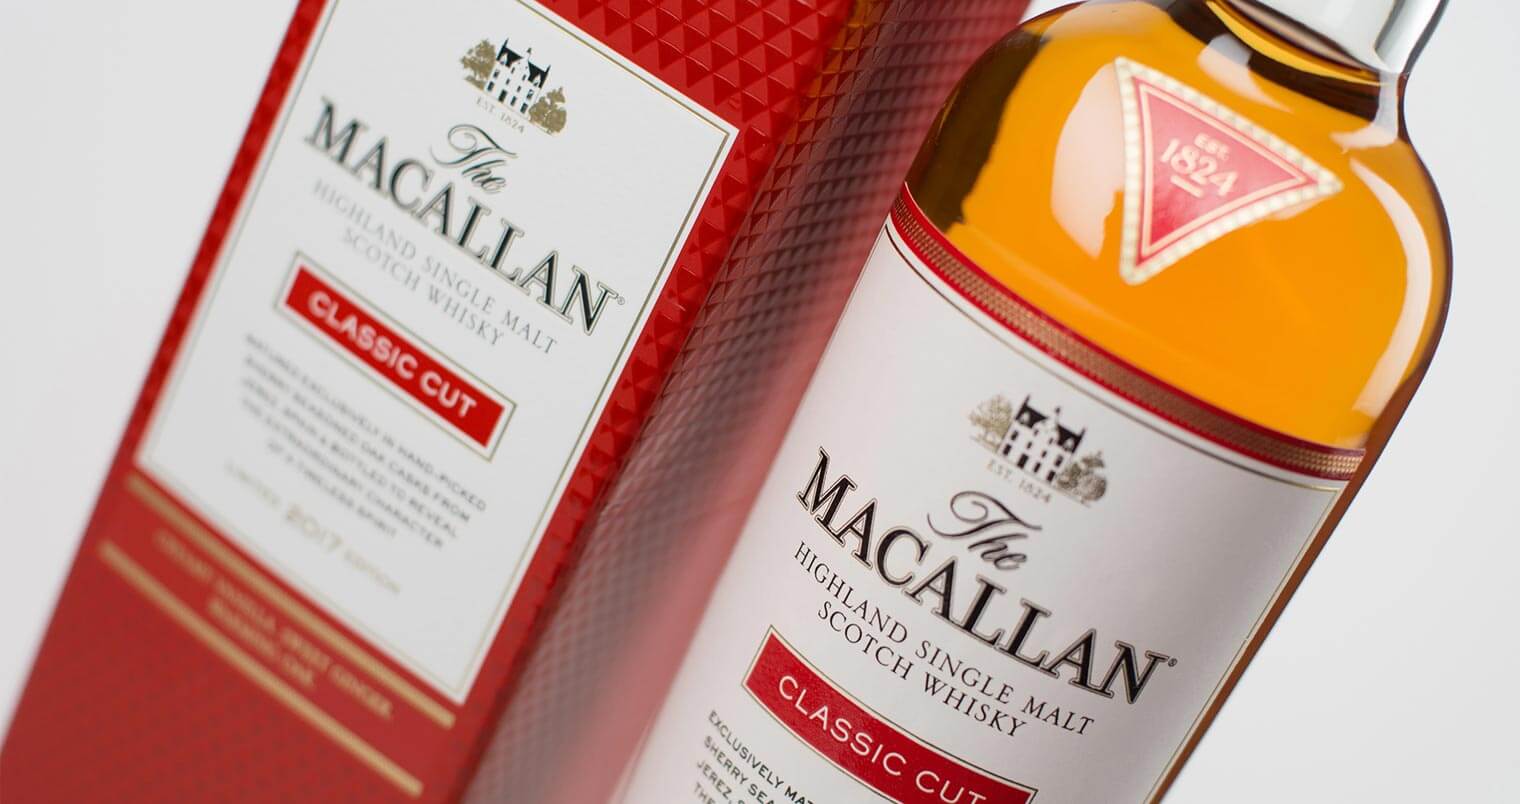 The Macallan Classic cut, bottle and packaging, featured image